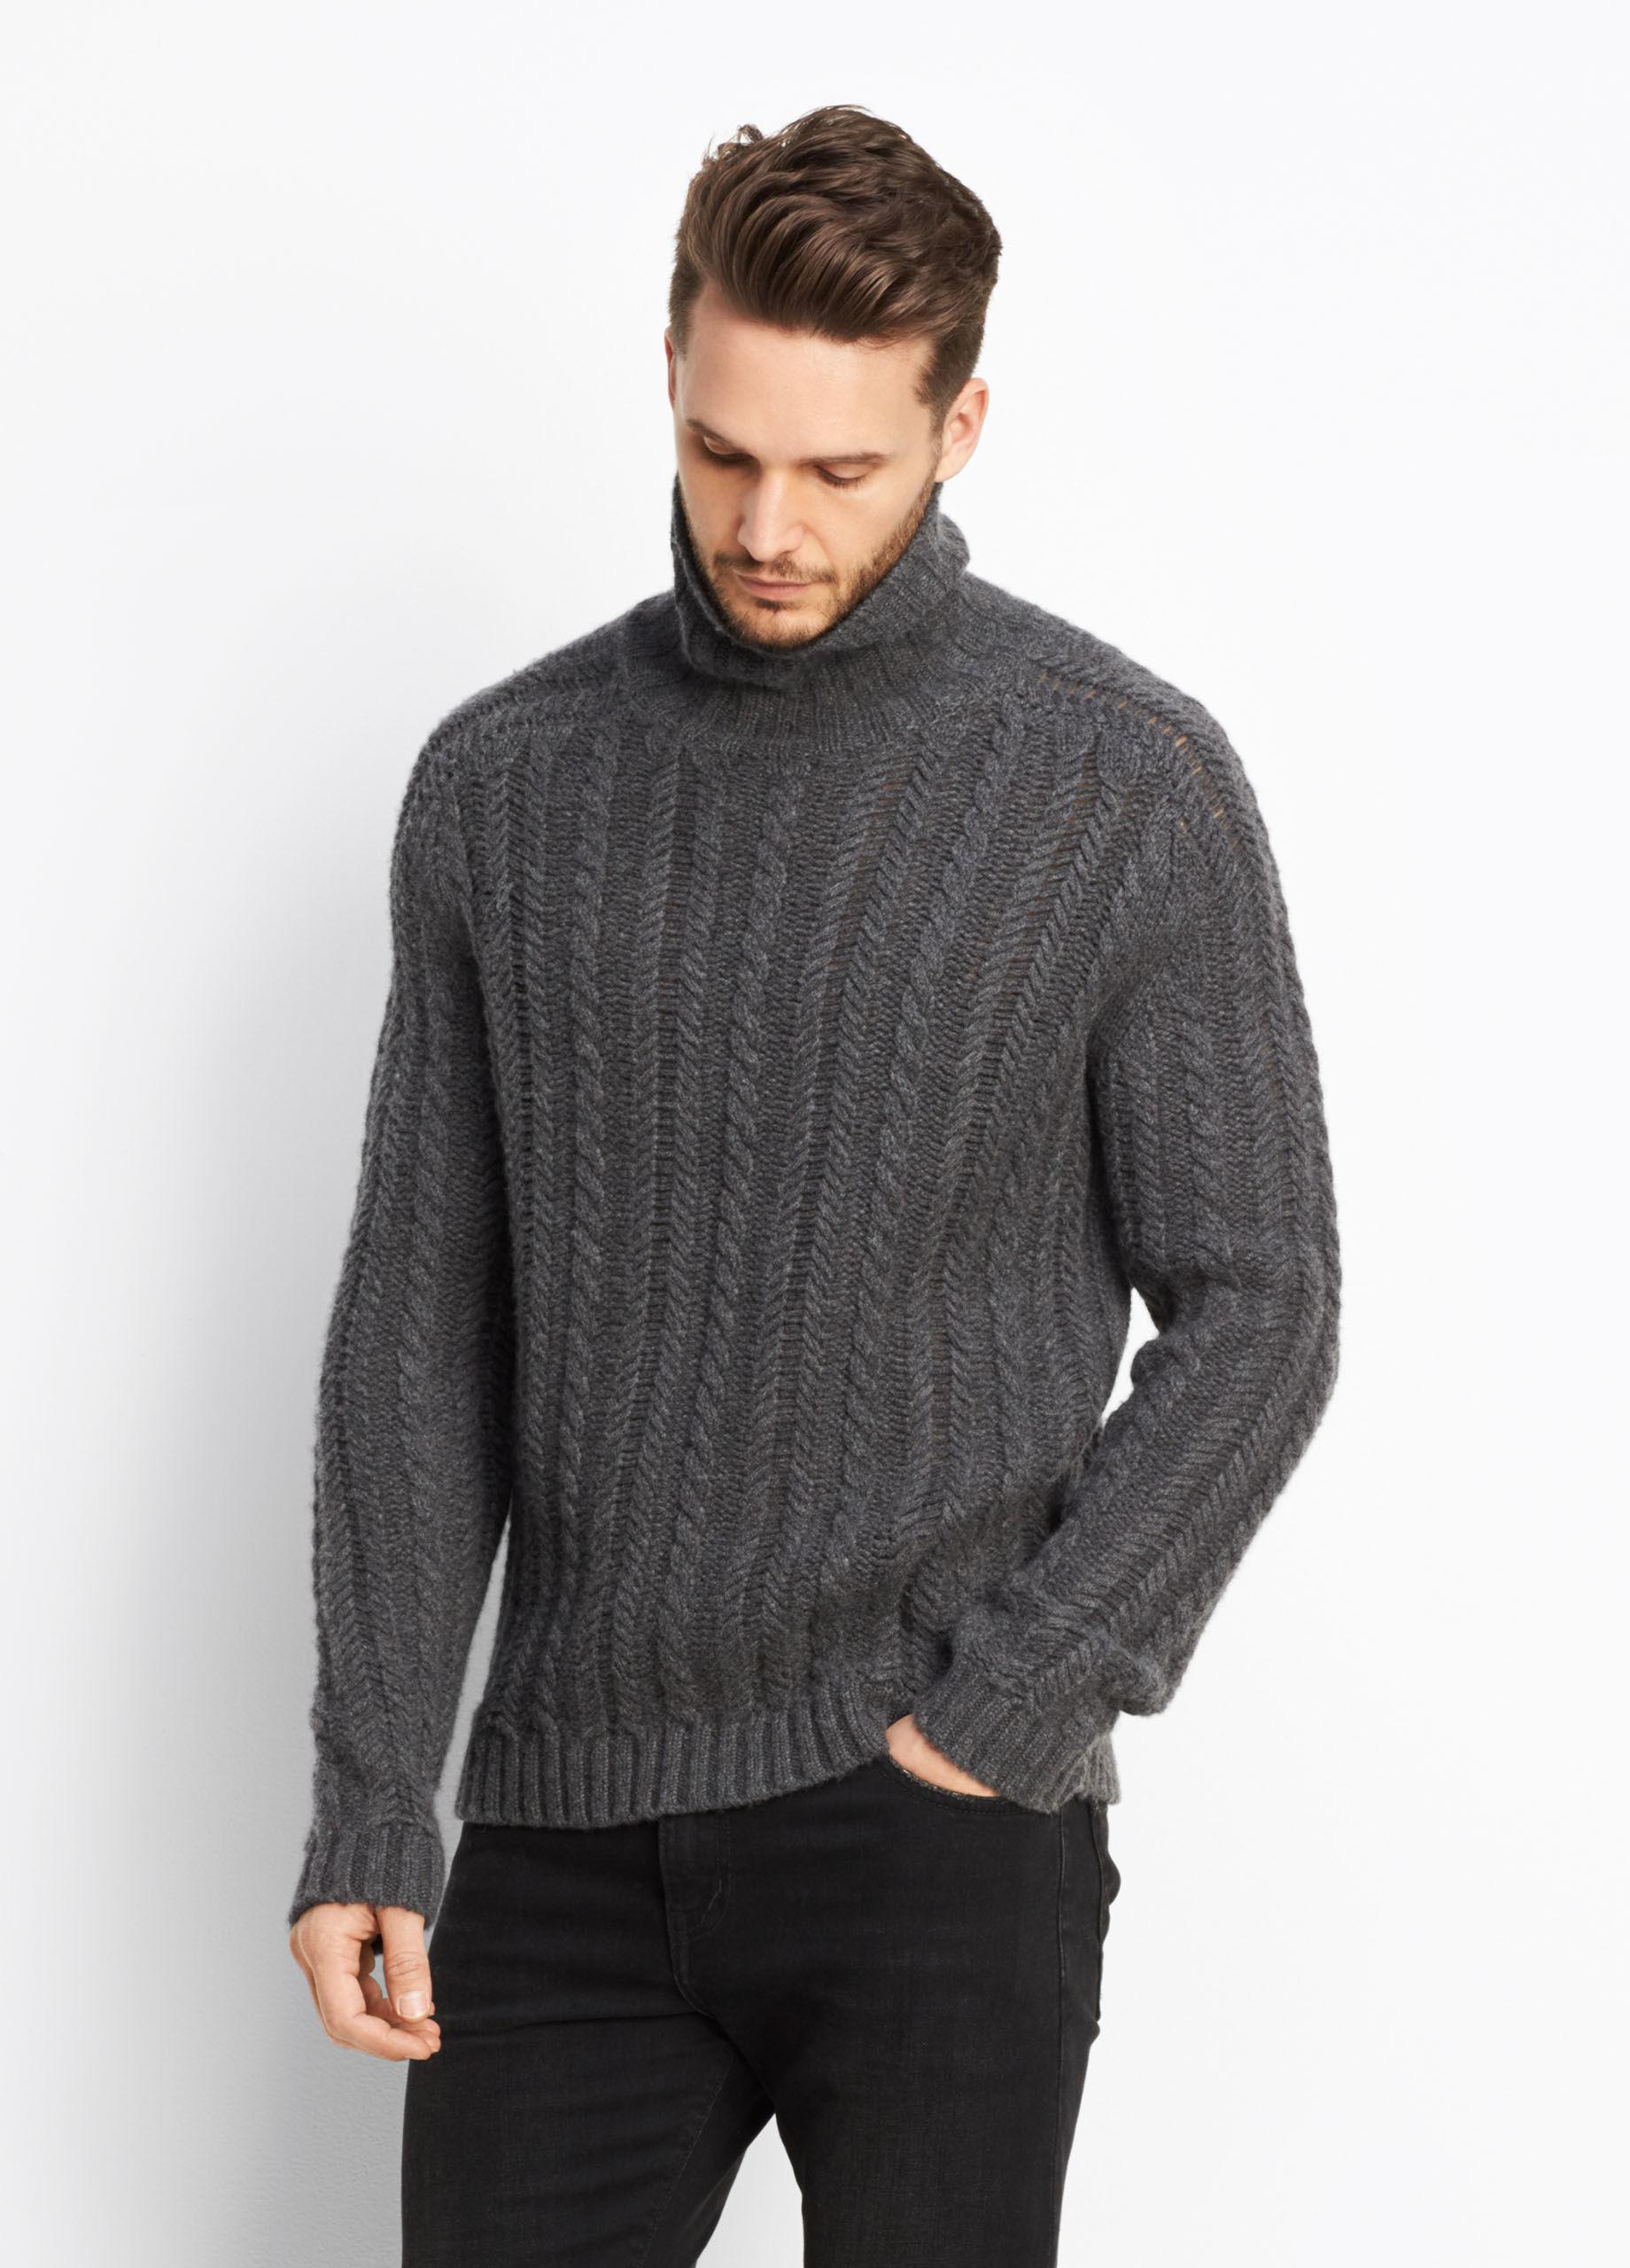 Get More And Better Sex With Knit Mens Turtleneck Sweater - Dorris L. Shull